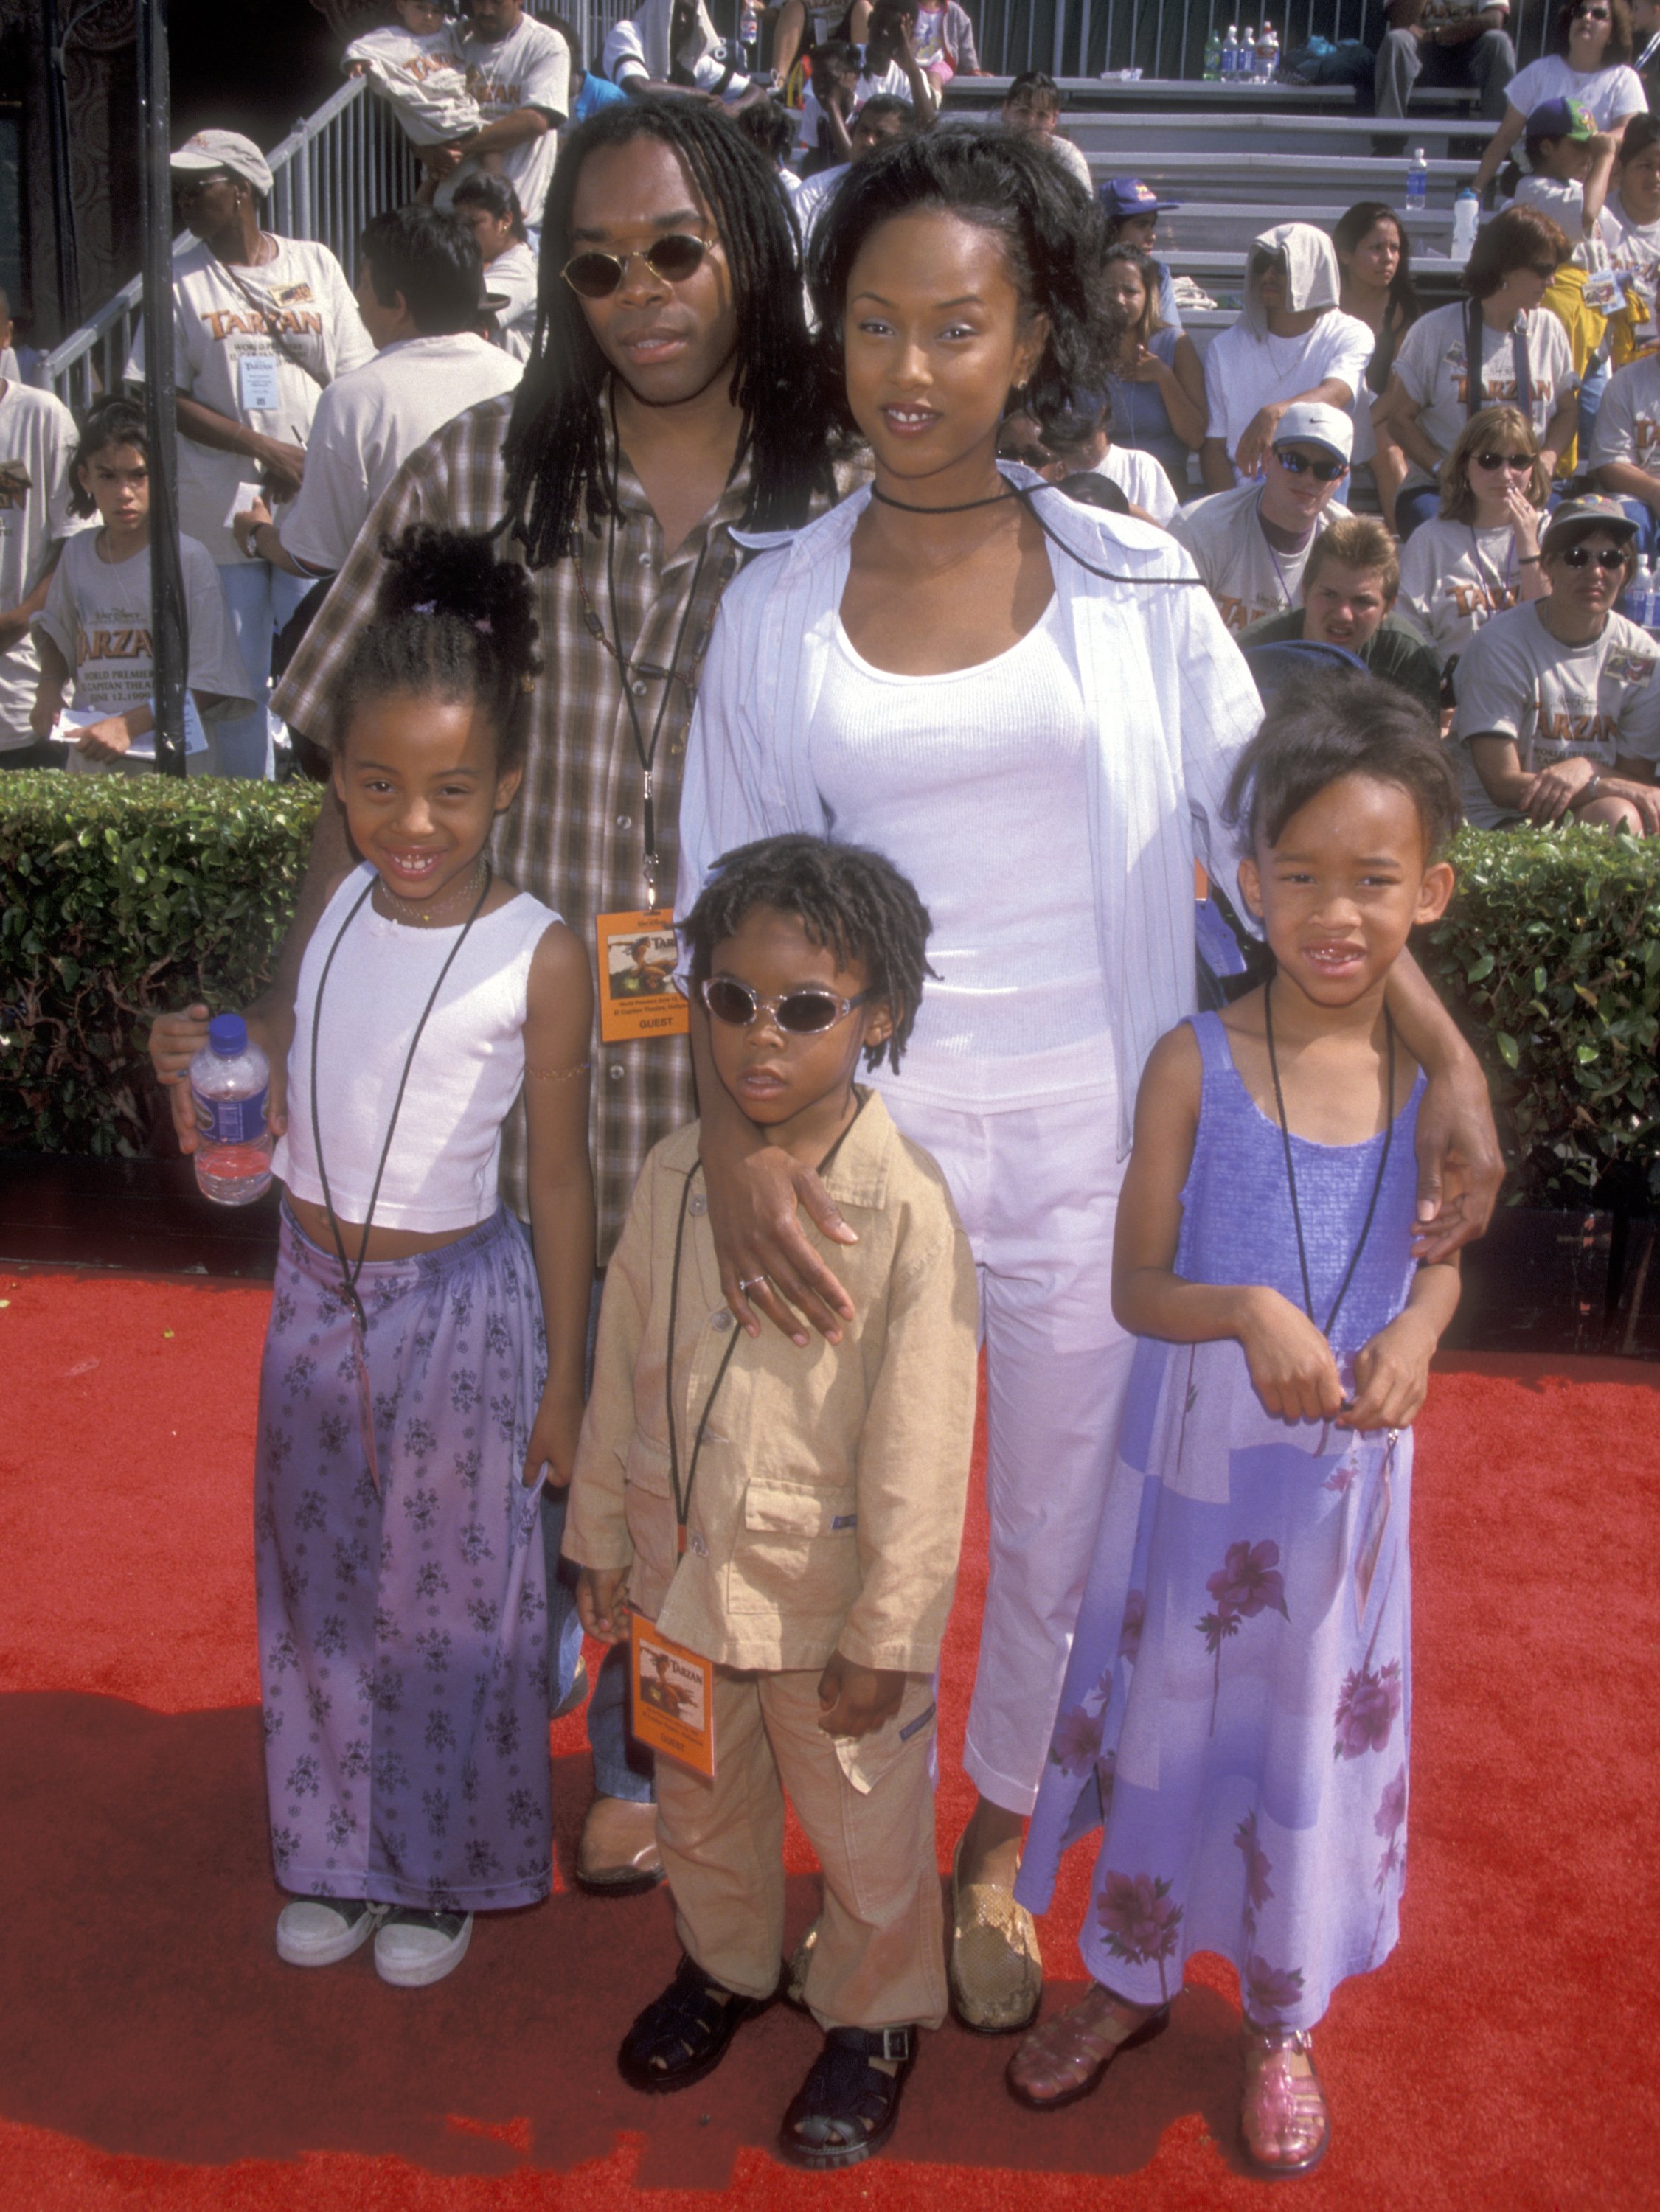 Courtland Davis, Trina McGee, and children at the Hollywood premiere of "Tarzan" on June 12, 1999 | Source: Getty Images